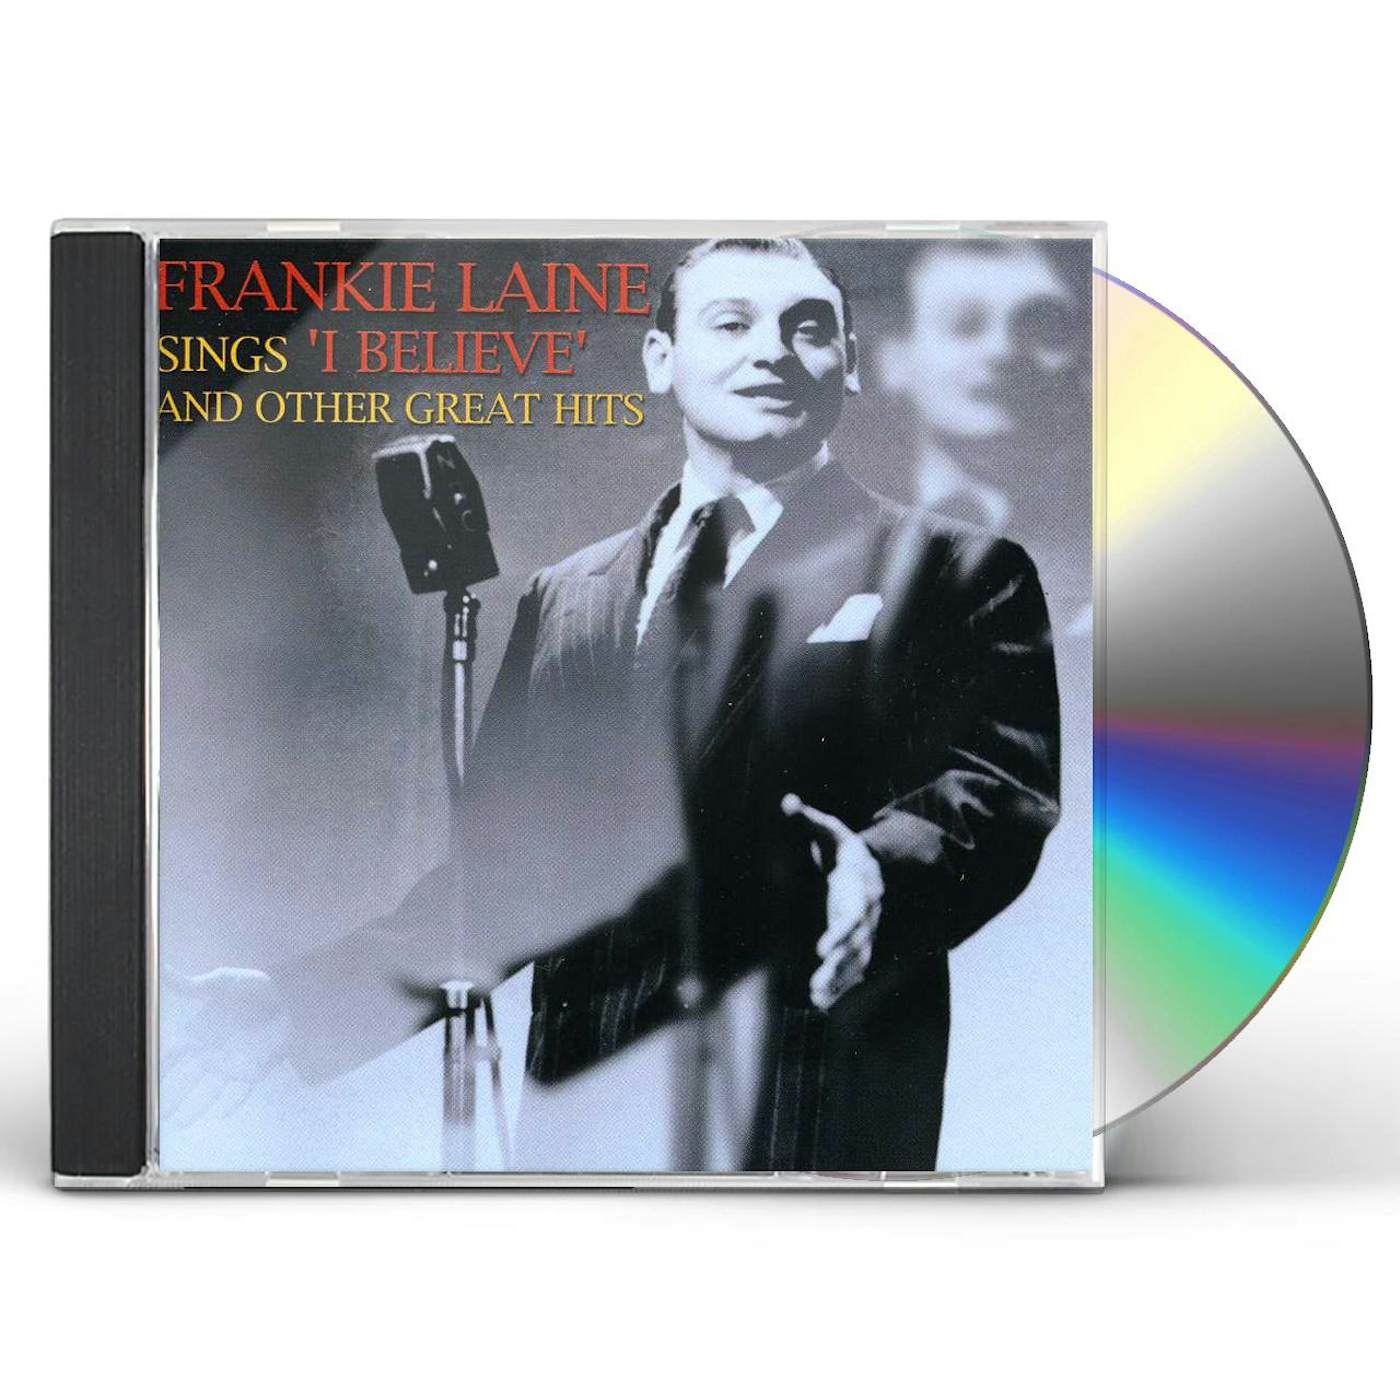 Frankie Laine SINGS I BELIEVE AND OTHER GREAT HITS CD